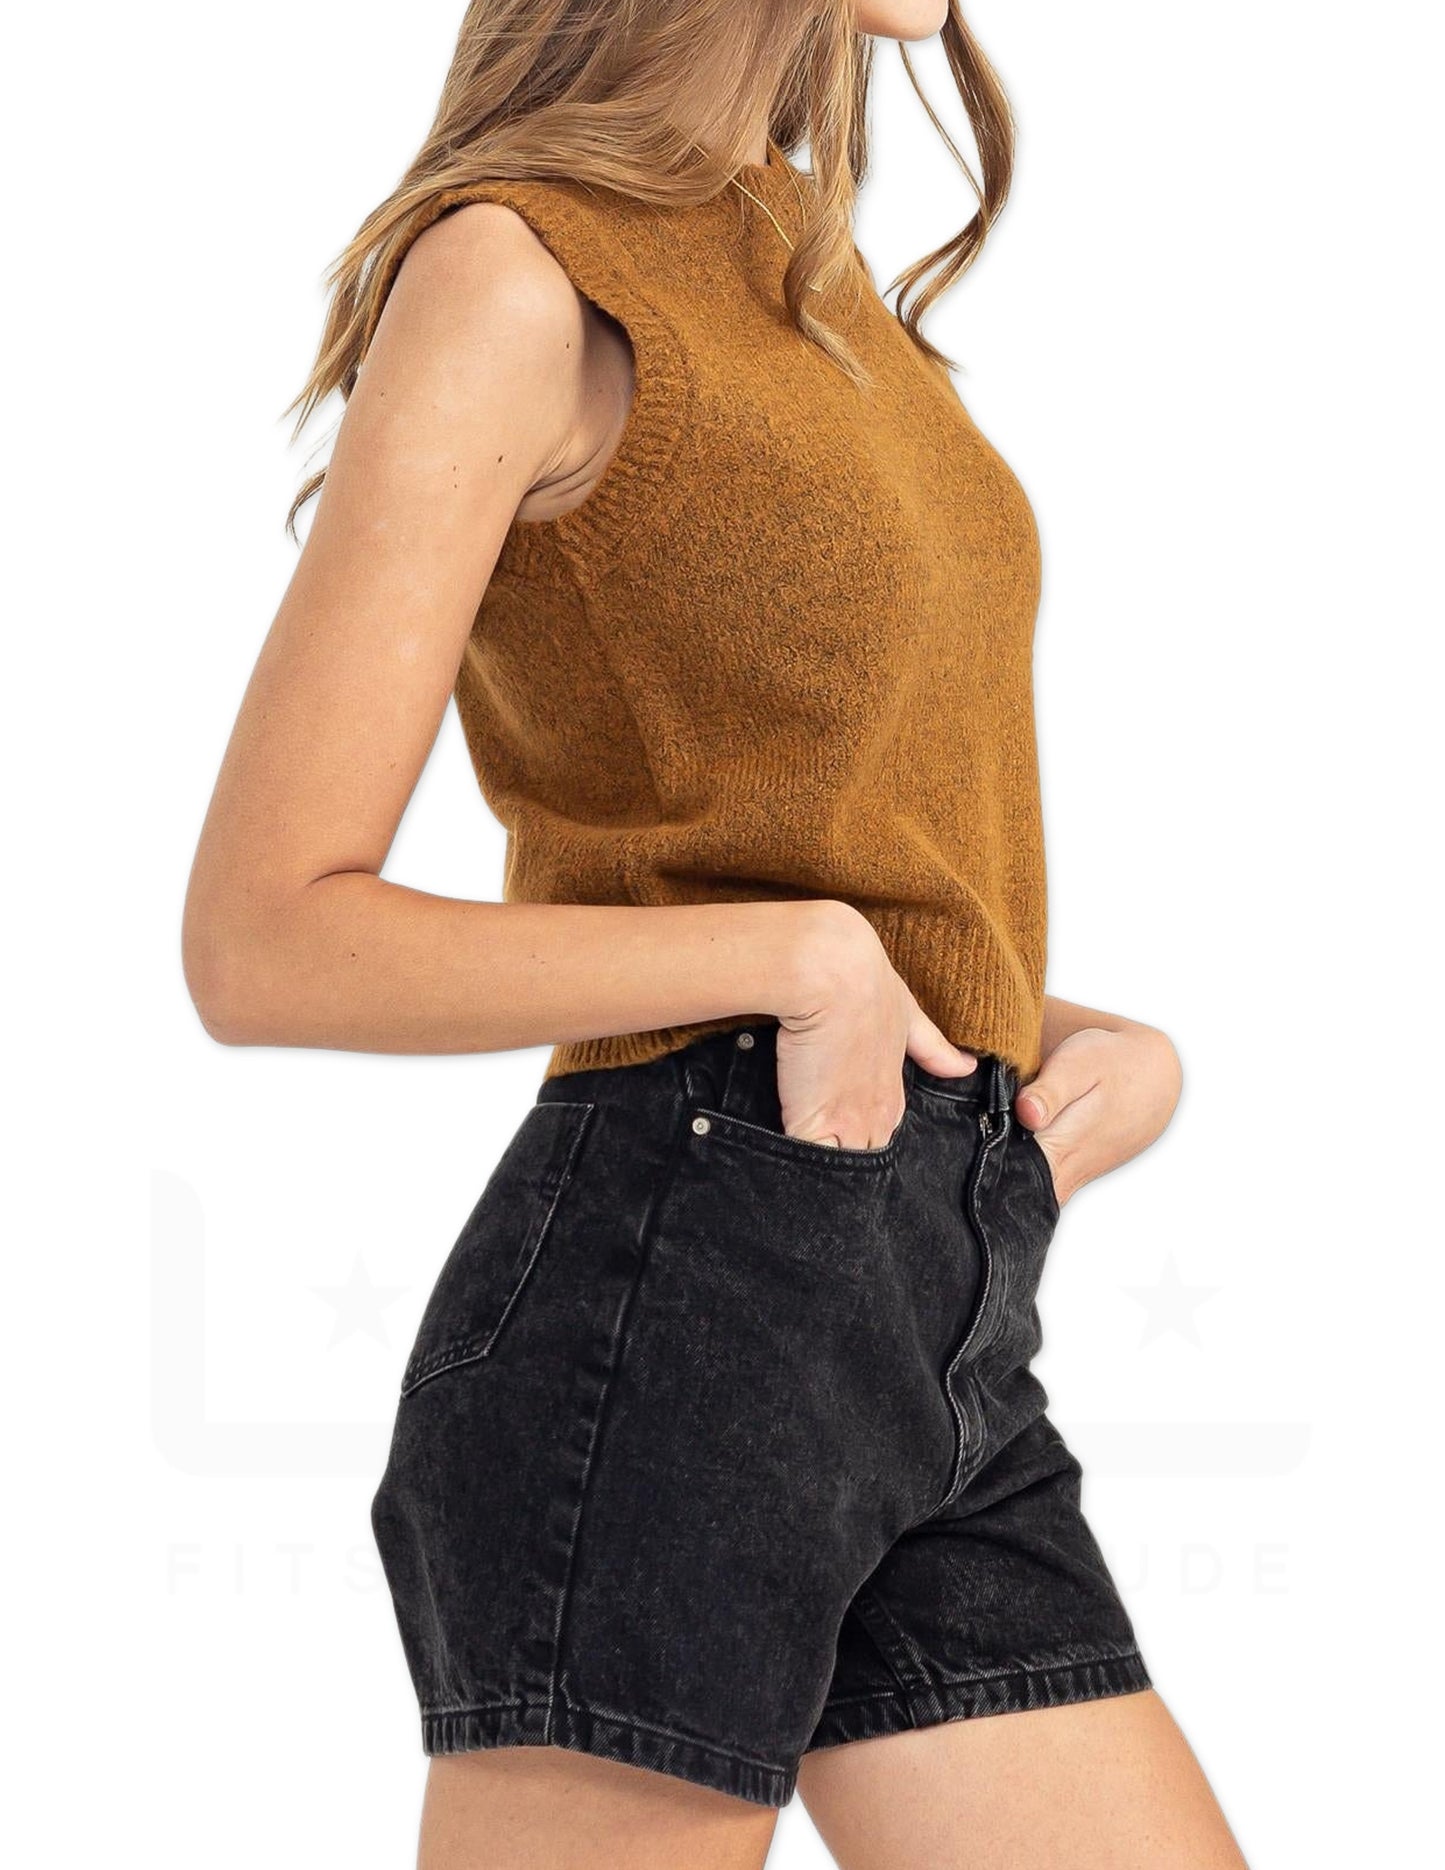 Sleeveless Cropped Sweater Top - Pale Brown